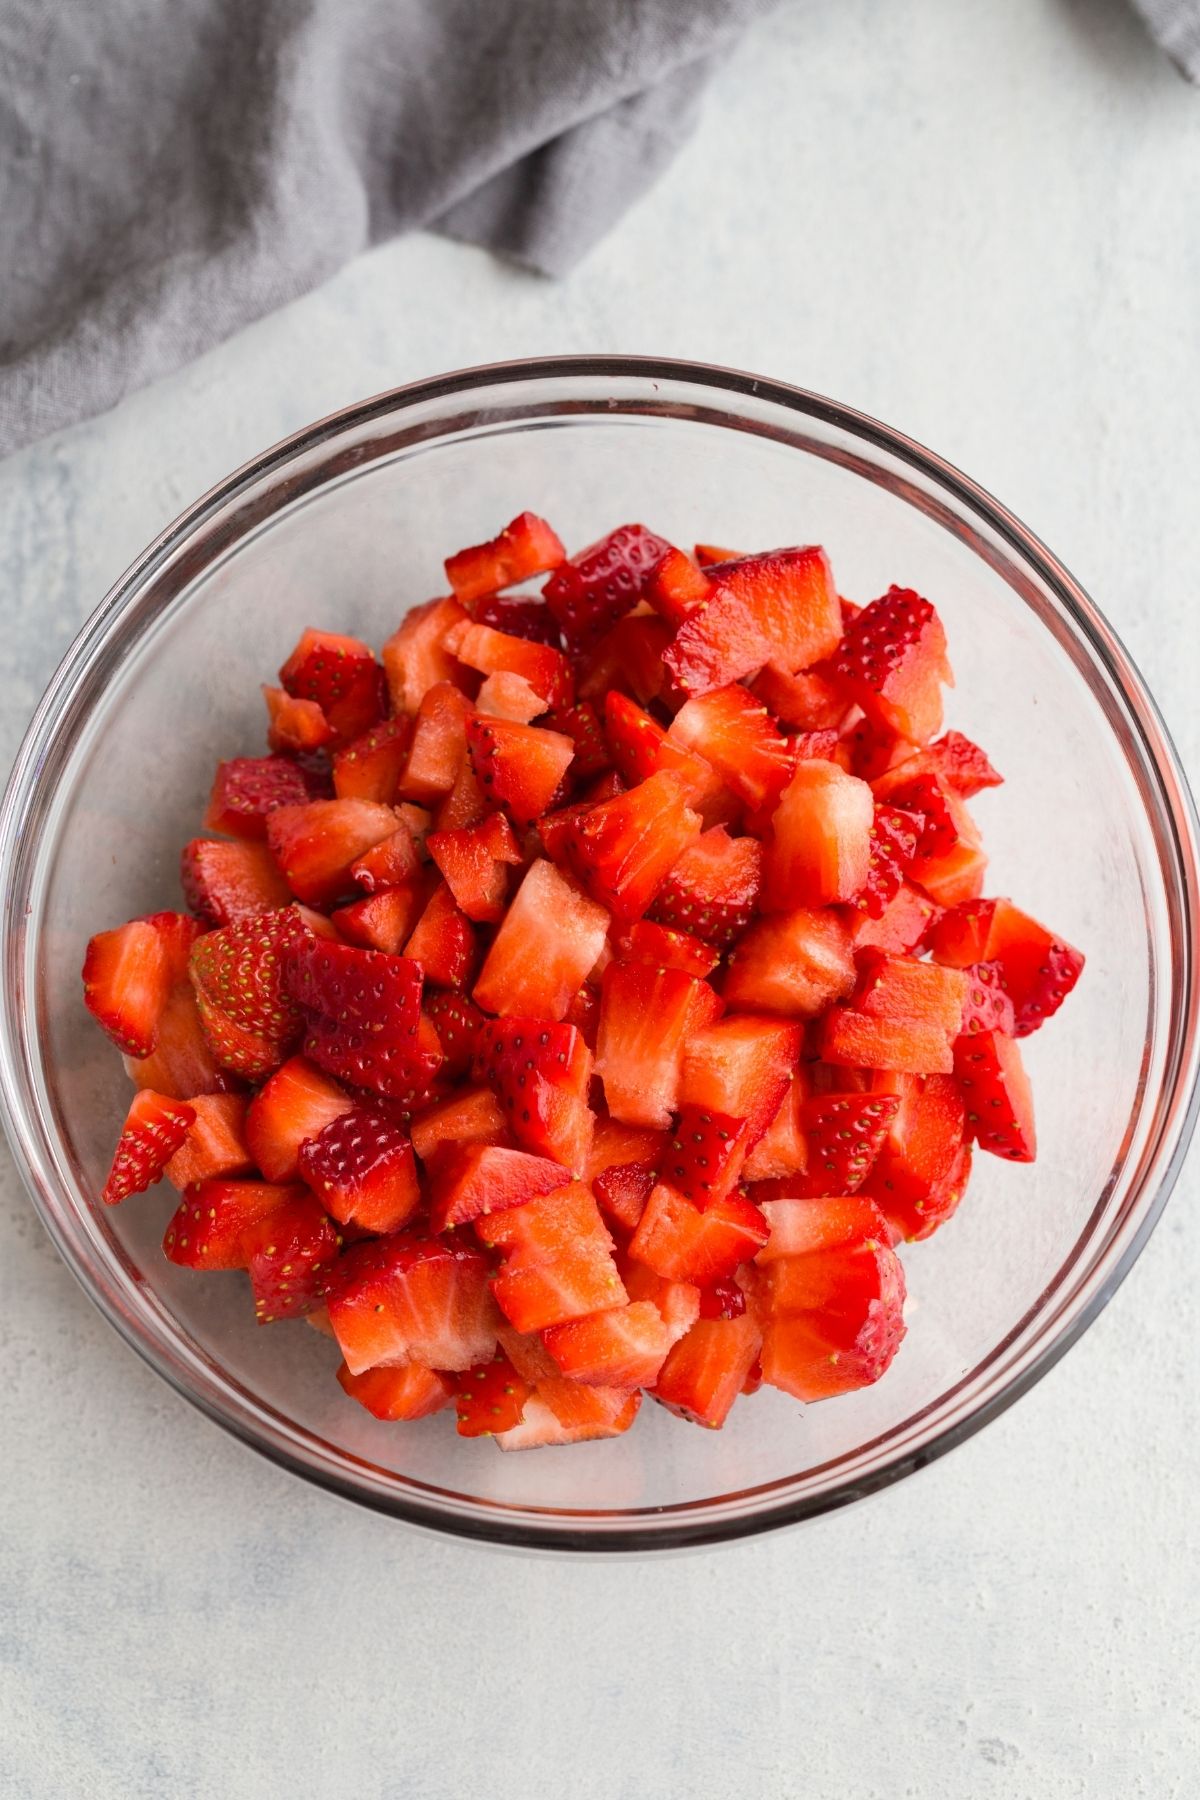 diced strawberries in glass bowl